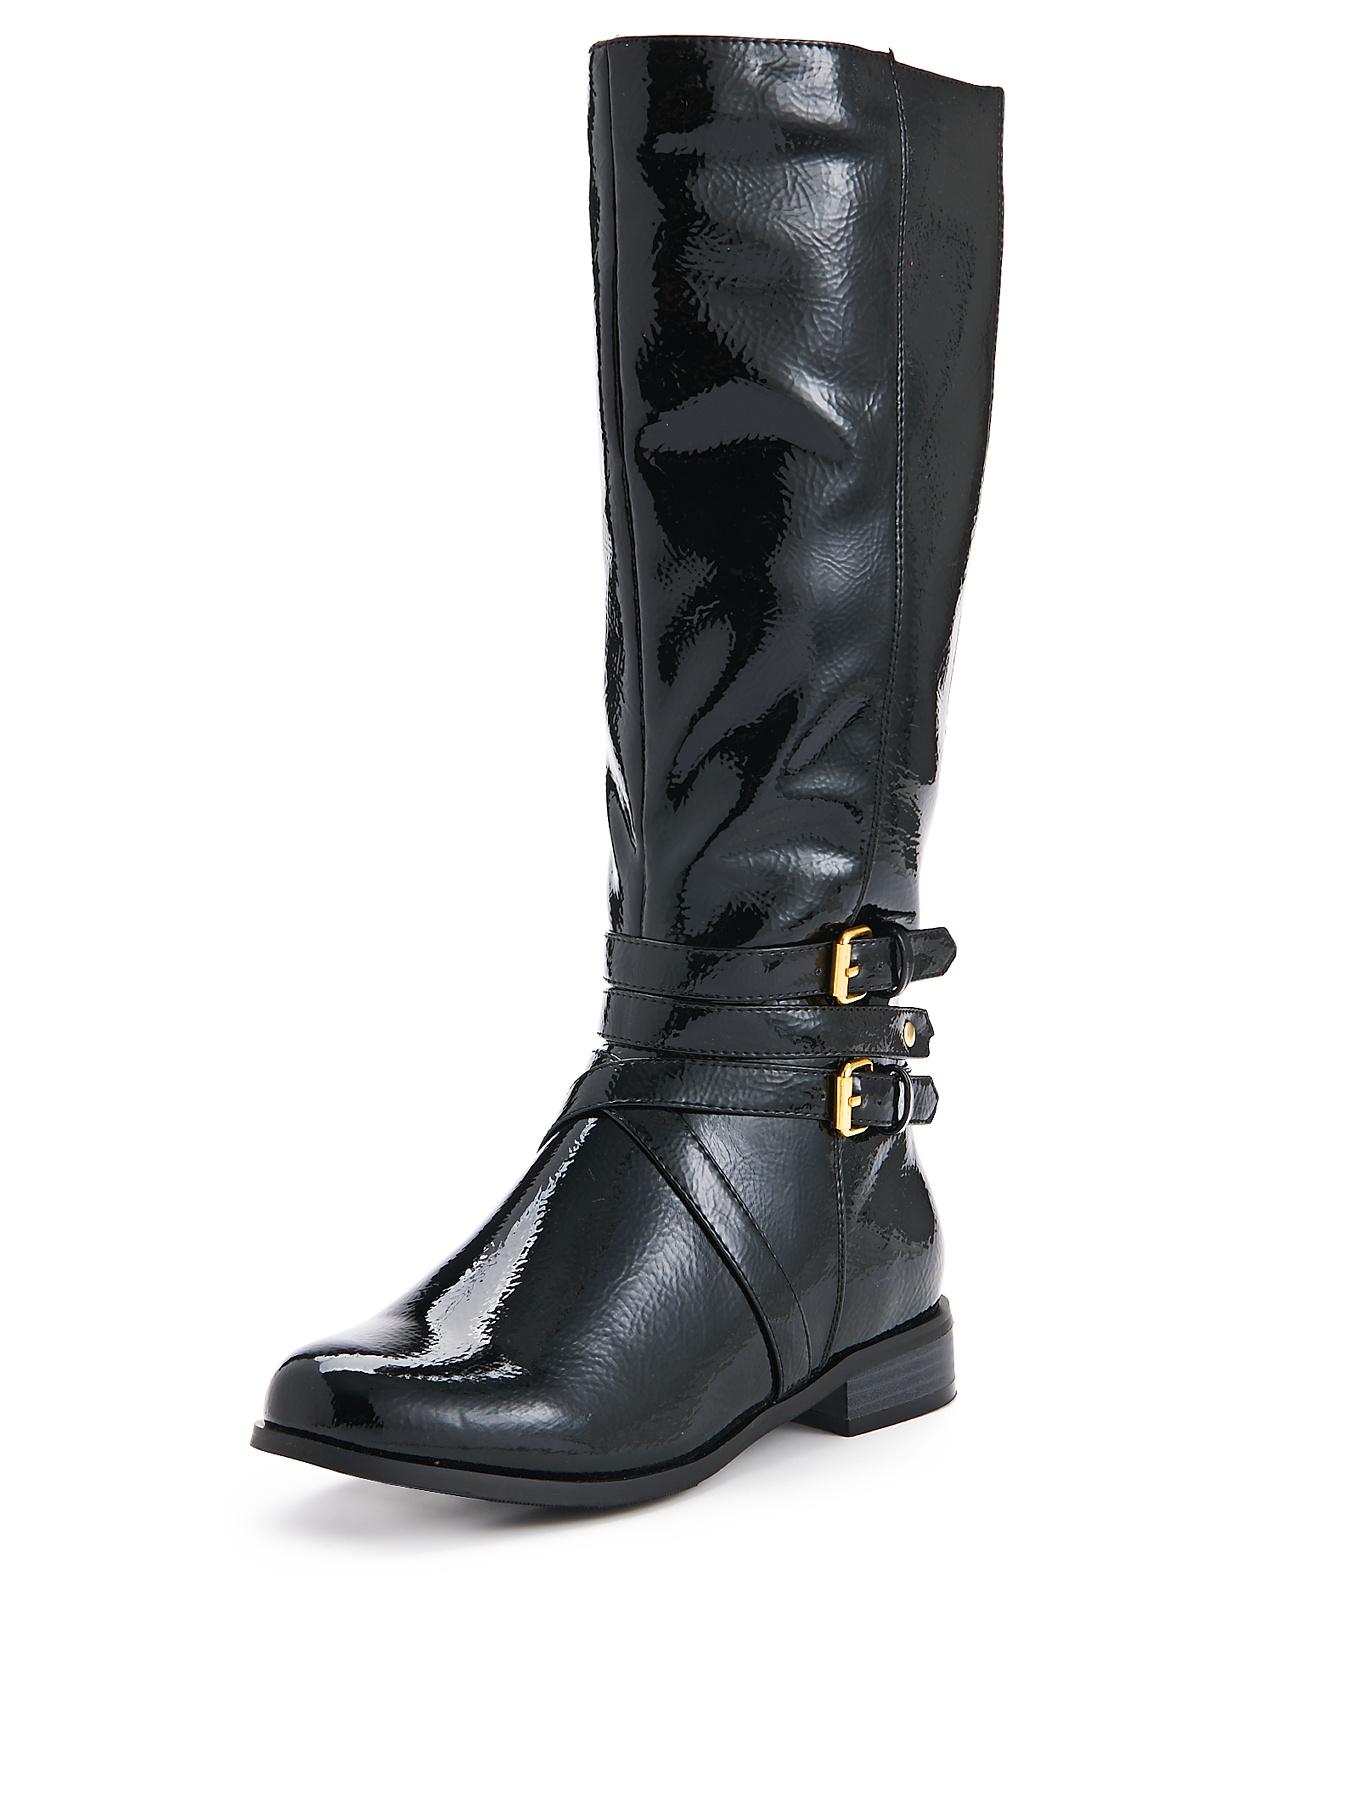 shoe-box-adelaide-buckle-detail-patent-standard-fit-riding-boots